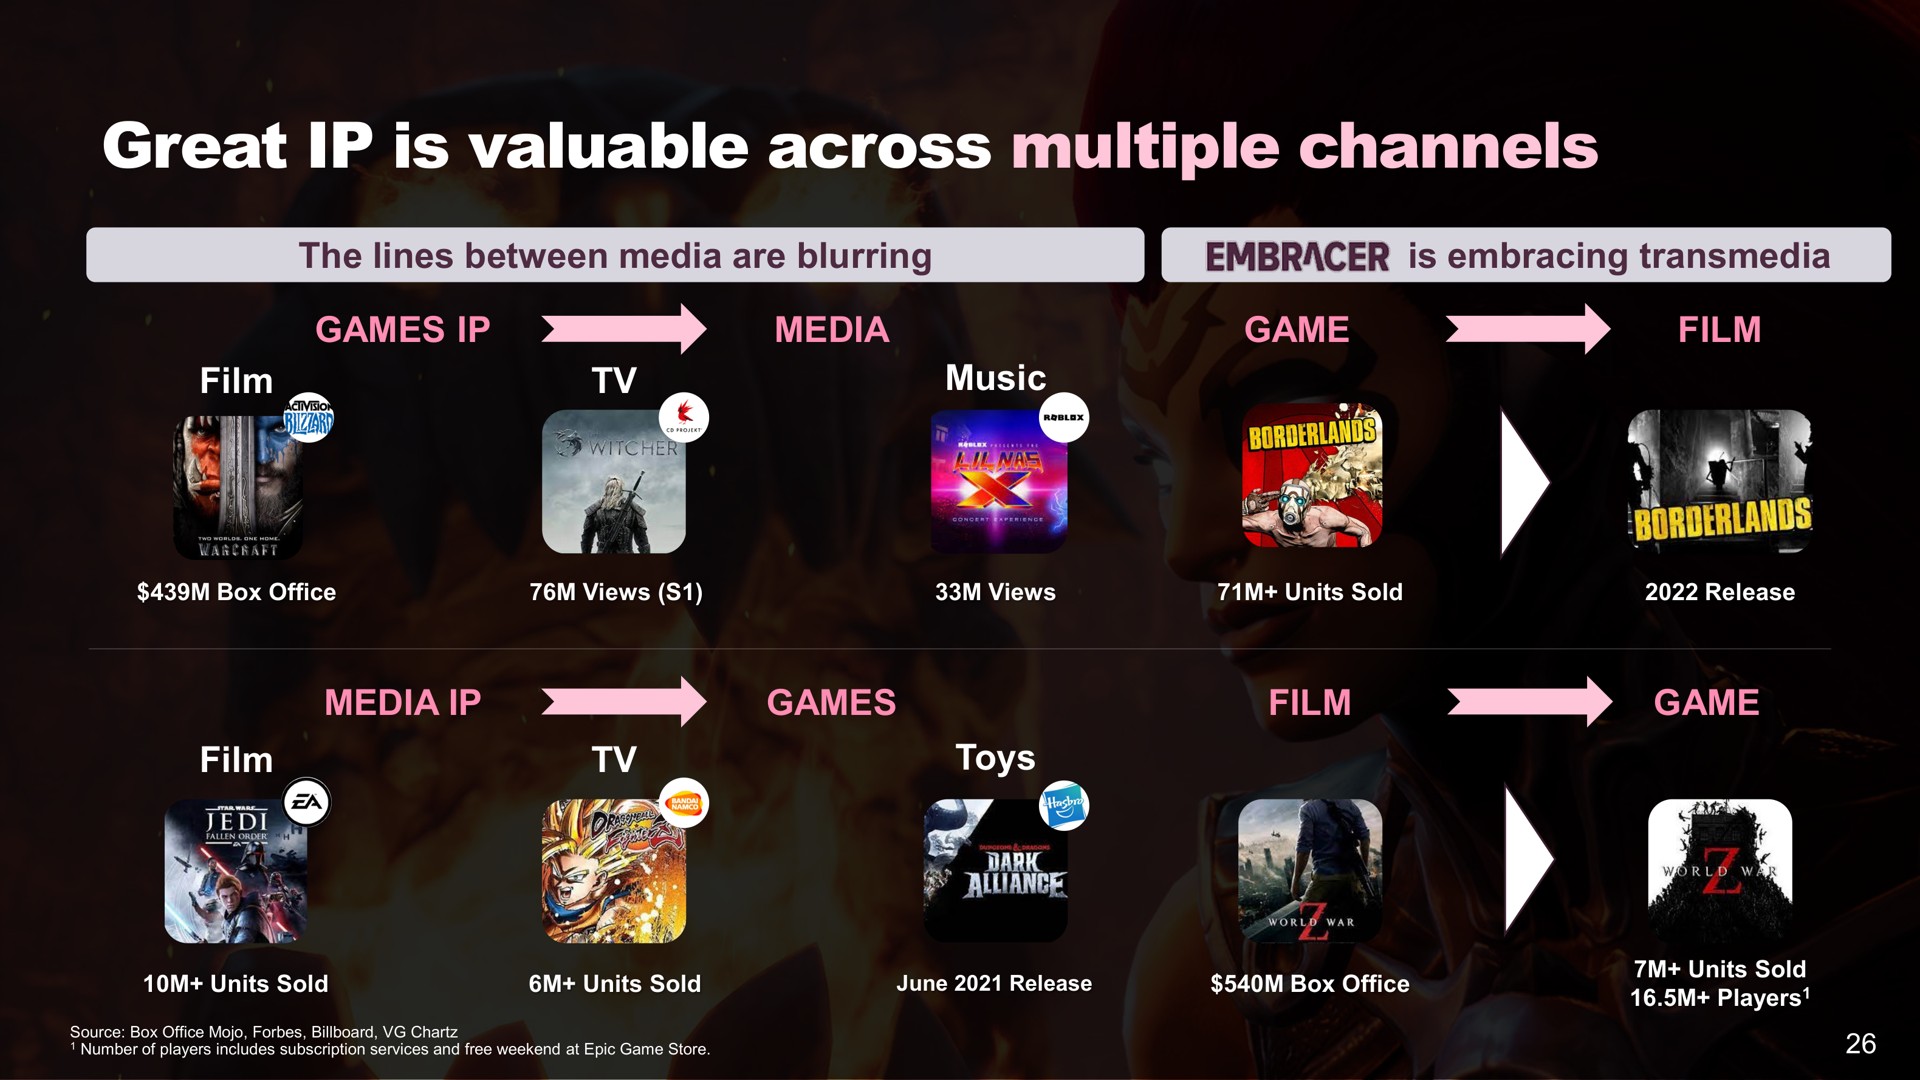 great is valuable across multiple channels the lines between media are blurring embracer is embracing games media game film film music media games film game film toys nee ces | Embracer Group